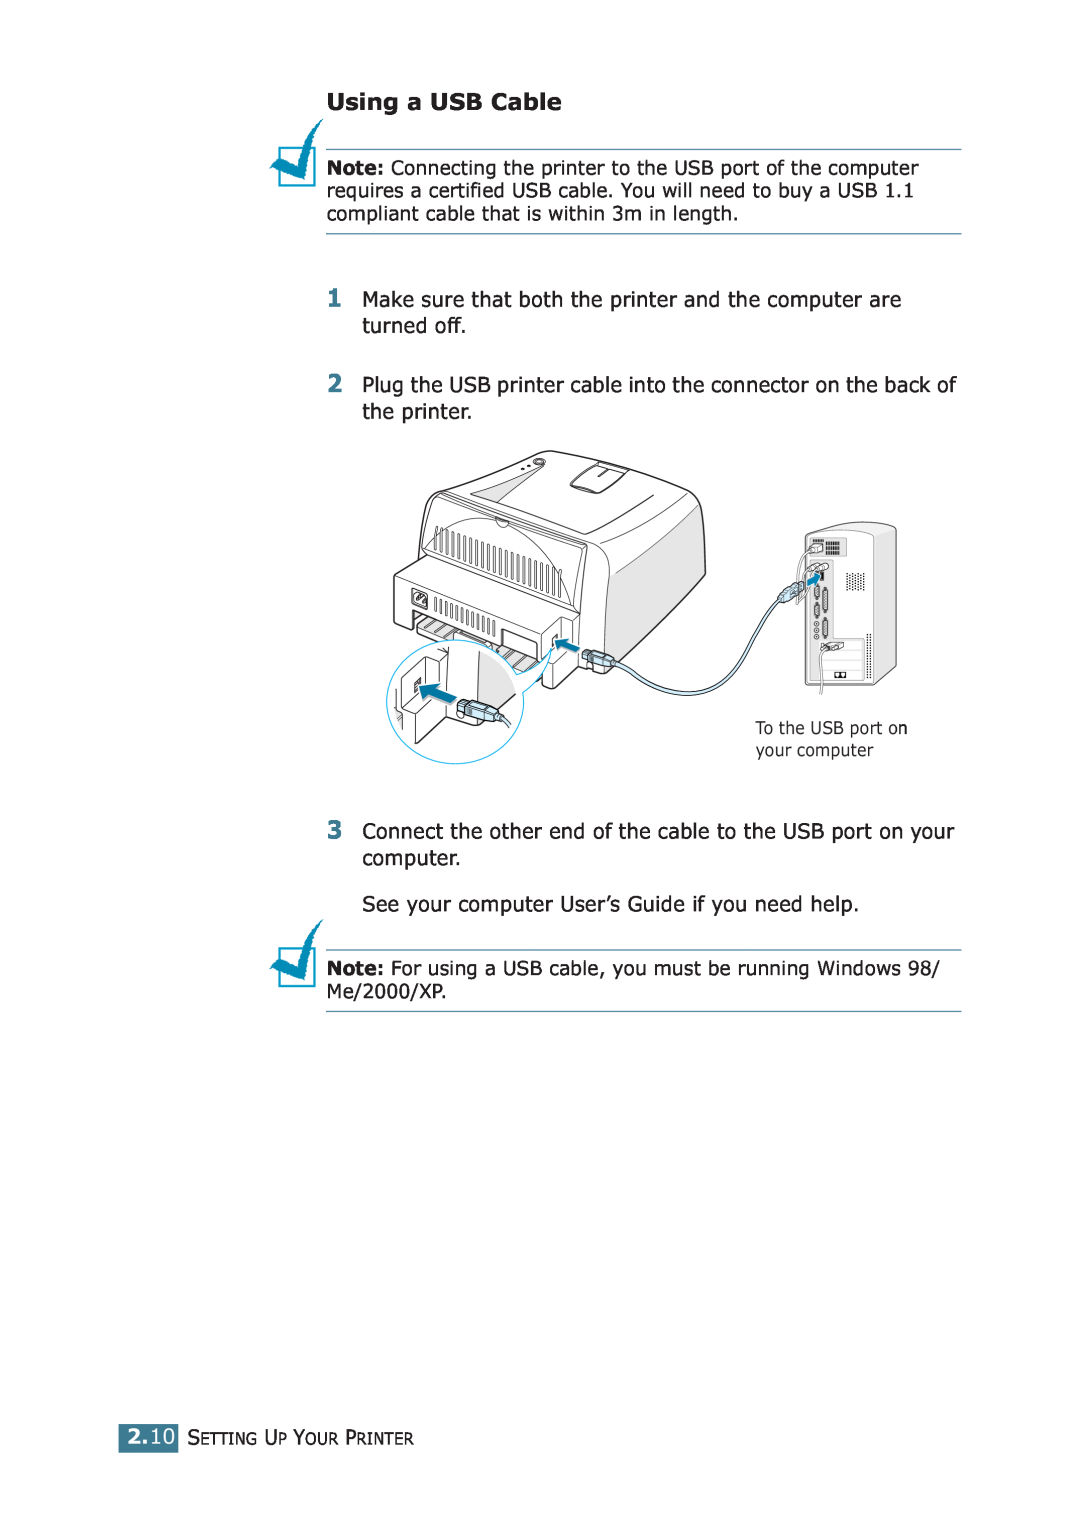 Samsung ML-1710P manual Using a USB Cable, To the USB port on your computer, Setting Up Your Printer 